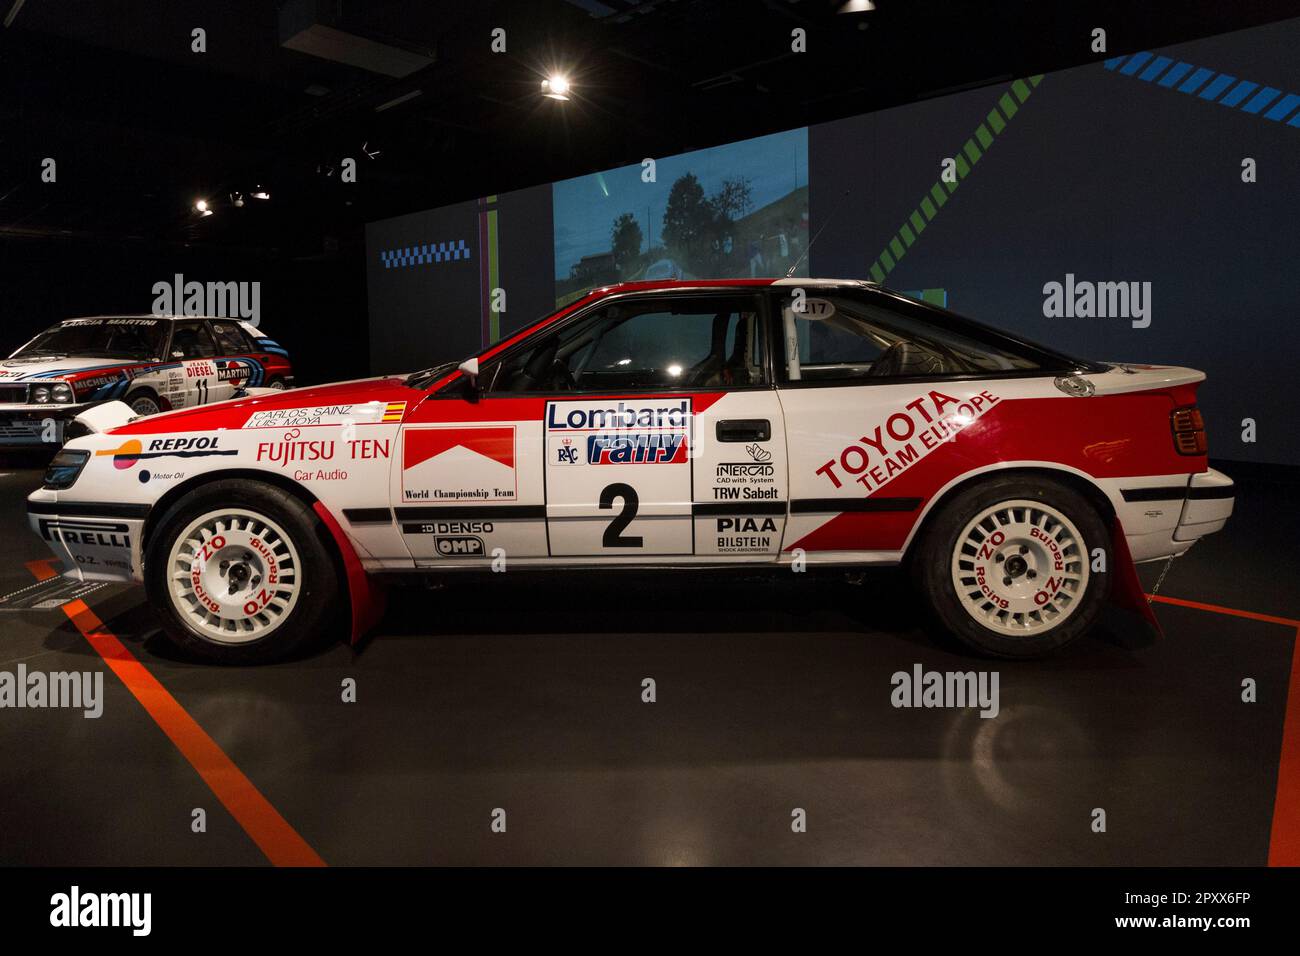 Toyota Celica GT-Four ST165 (1990). Exhibition of old rally cars 'Golden age of Rally' at MAUTO, Museo dell'Automobile of Turin, Italy. Stock Photo